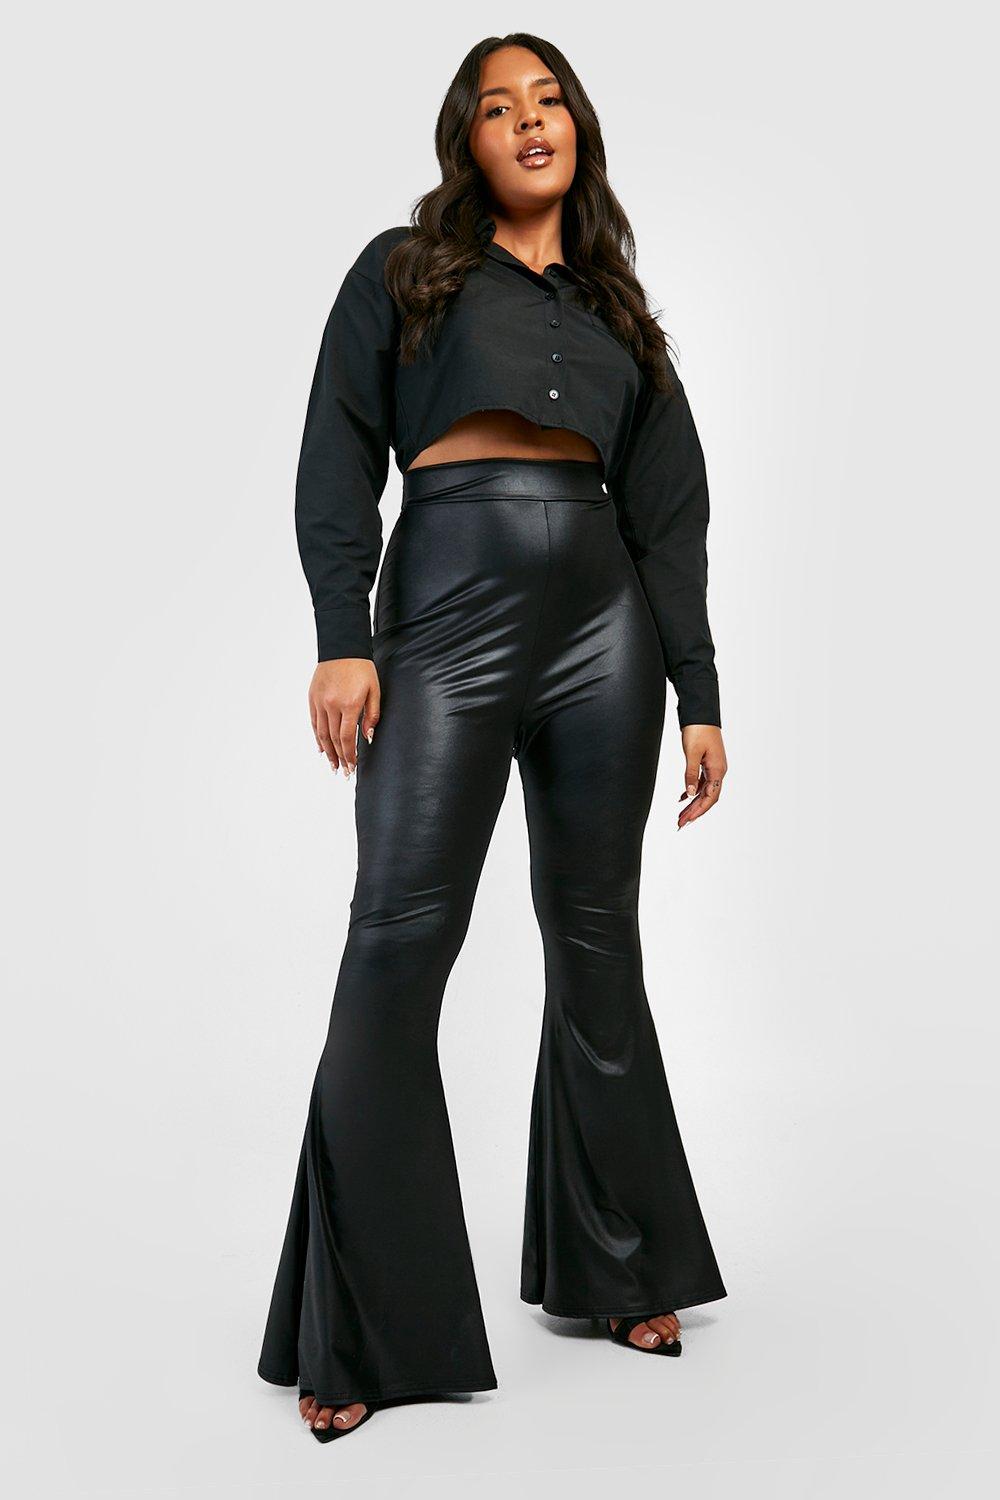 Plus Size Faux Leather High Waisted Flare Pants